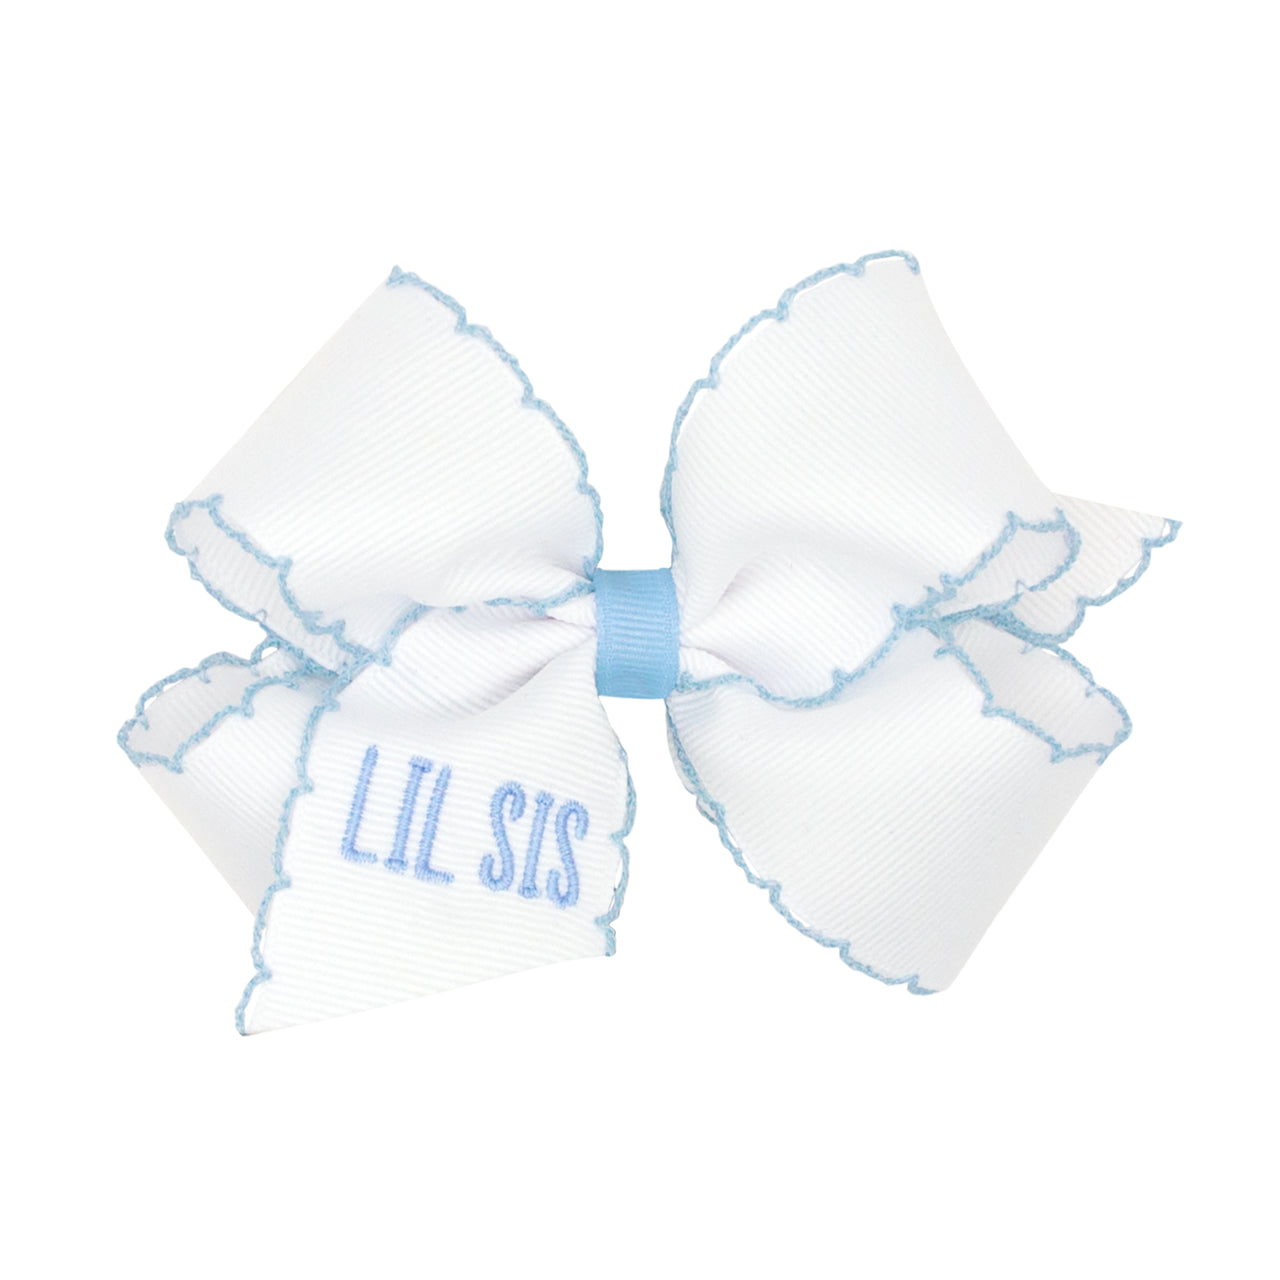 Wee Ones Medium "Lil Sis" Embroidered Grosgrain Bows